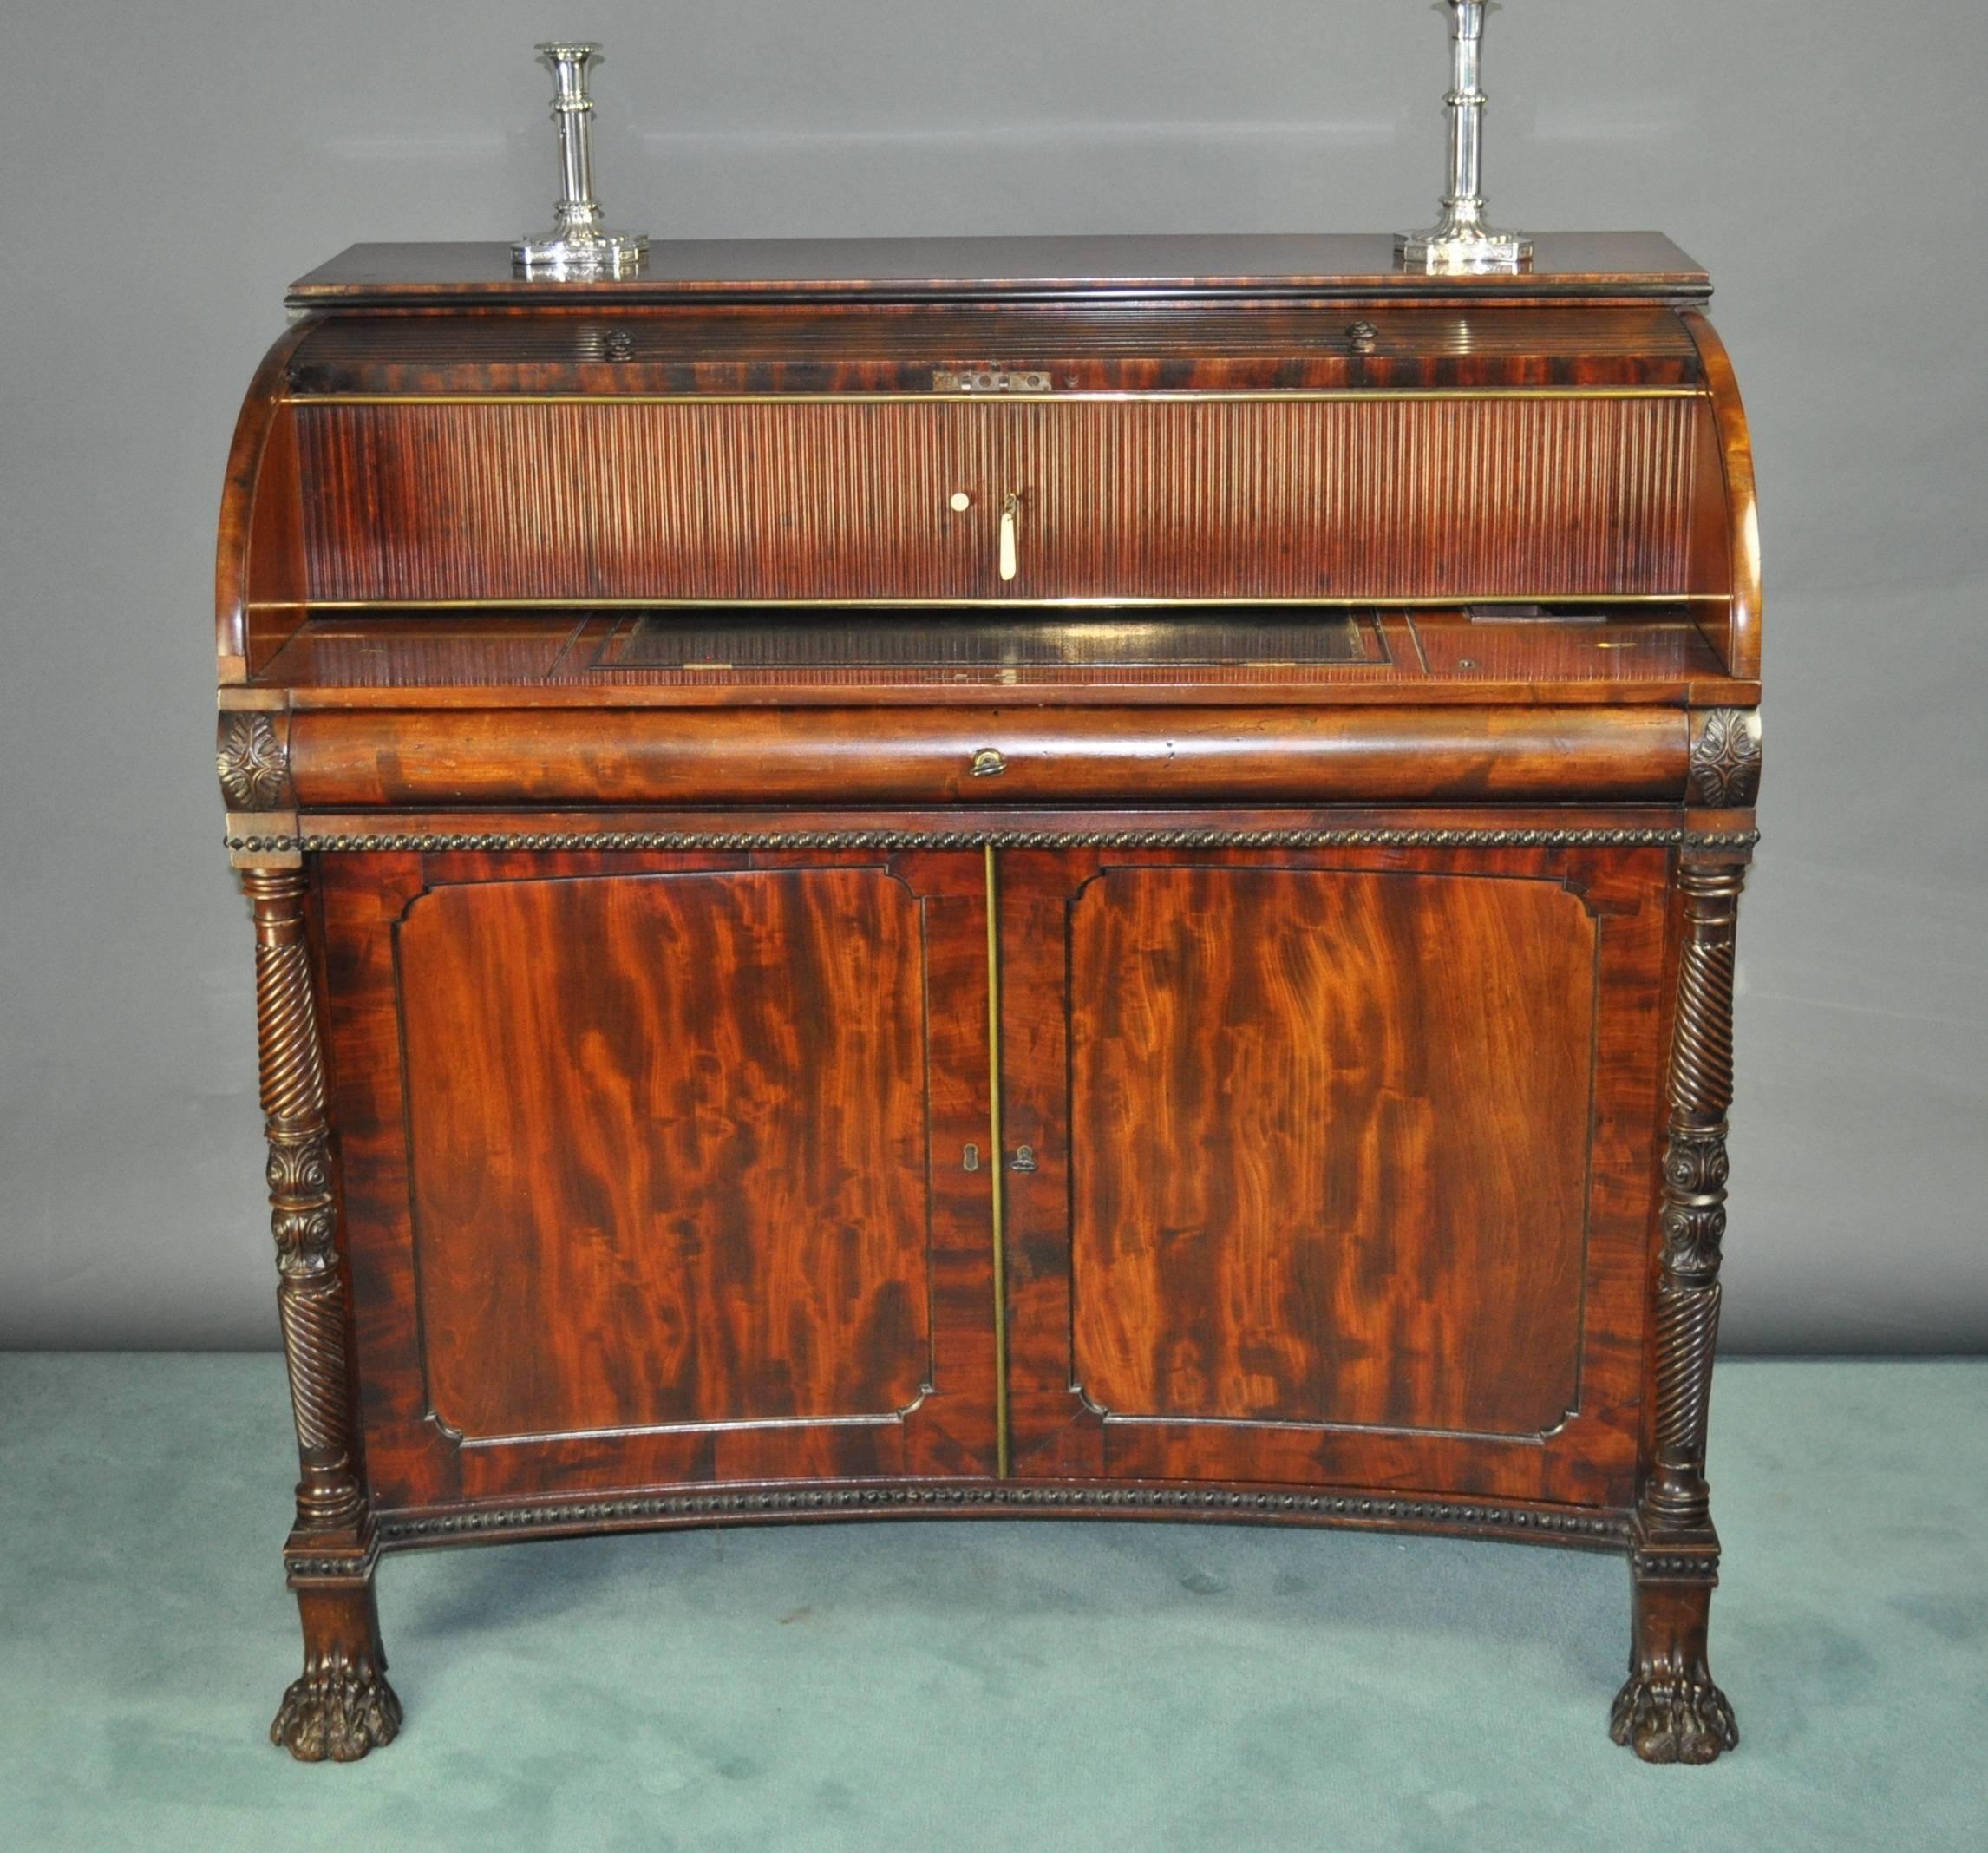 Regency Mahogany Tambour Top Desk In Good Condition For Sale In Folkestone, Kent